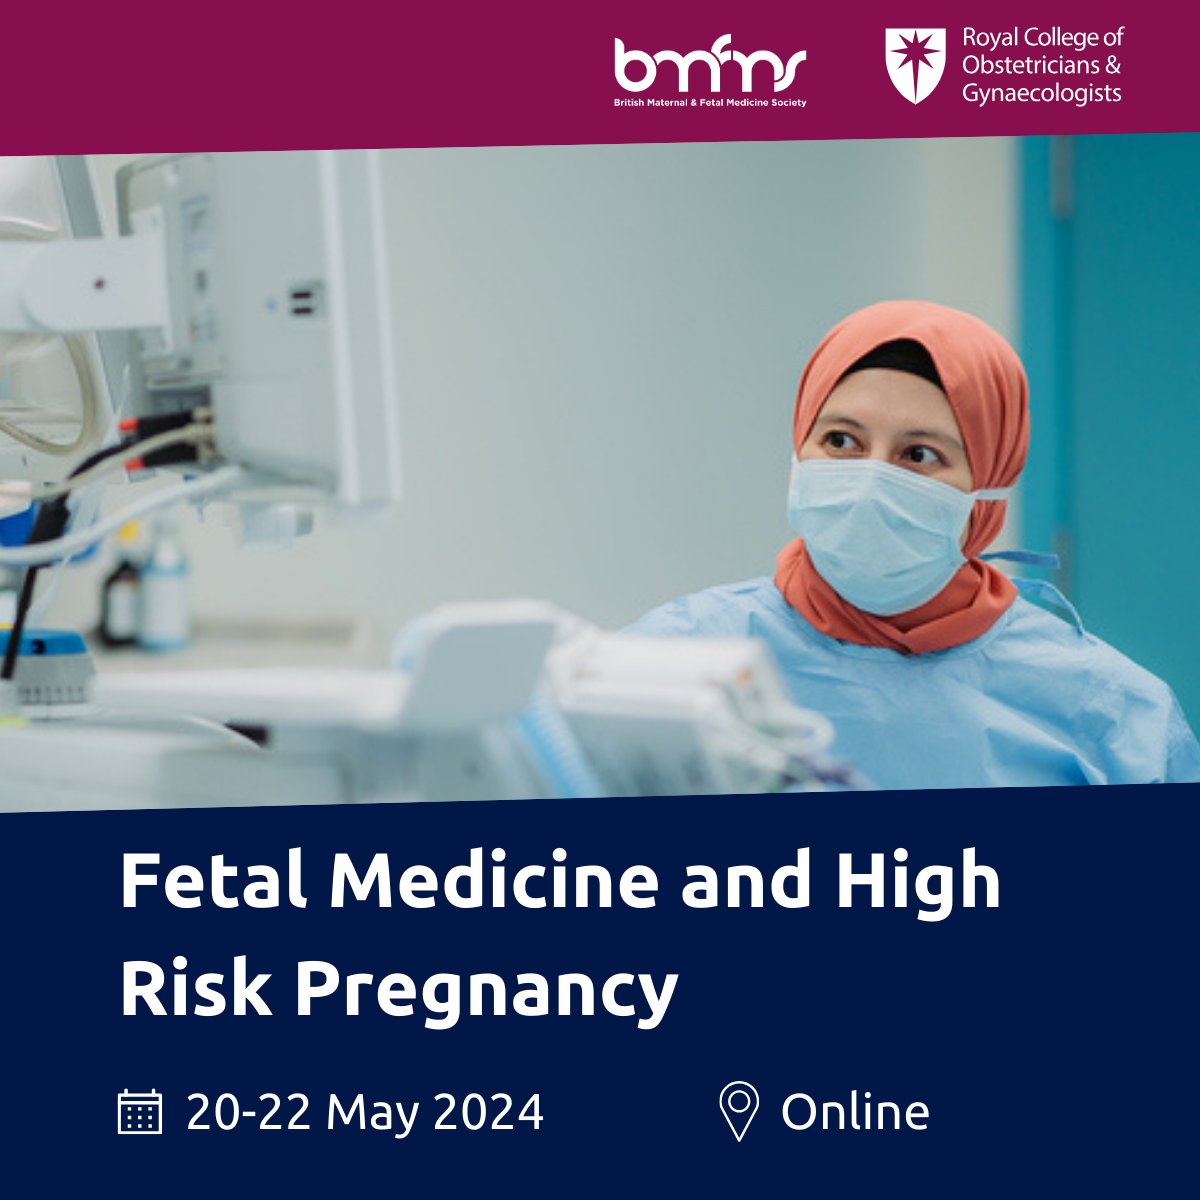 This course provides the knowledge required to fulfil one of the course requirements for subspecialist training in maternal and fetal medicine. It further aligns with the criteria outlined for the ATSM in Fetal Medicine or High-Risk Pregnancy: brnw.ch/21wJhx1